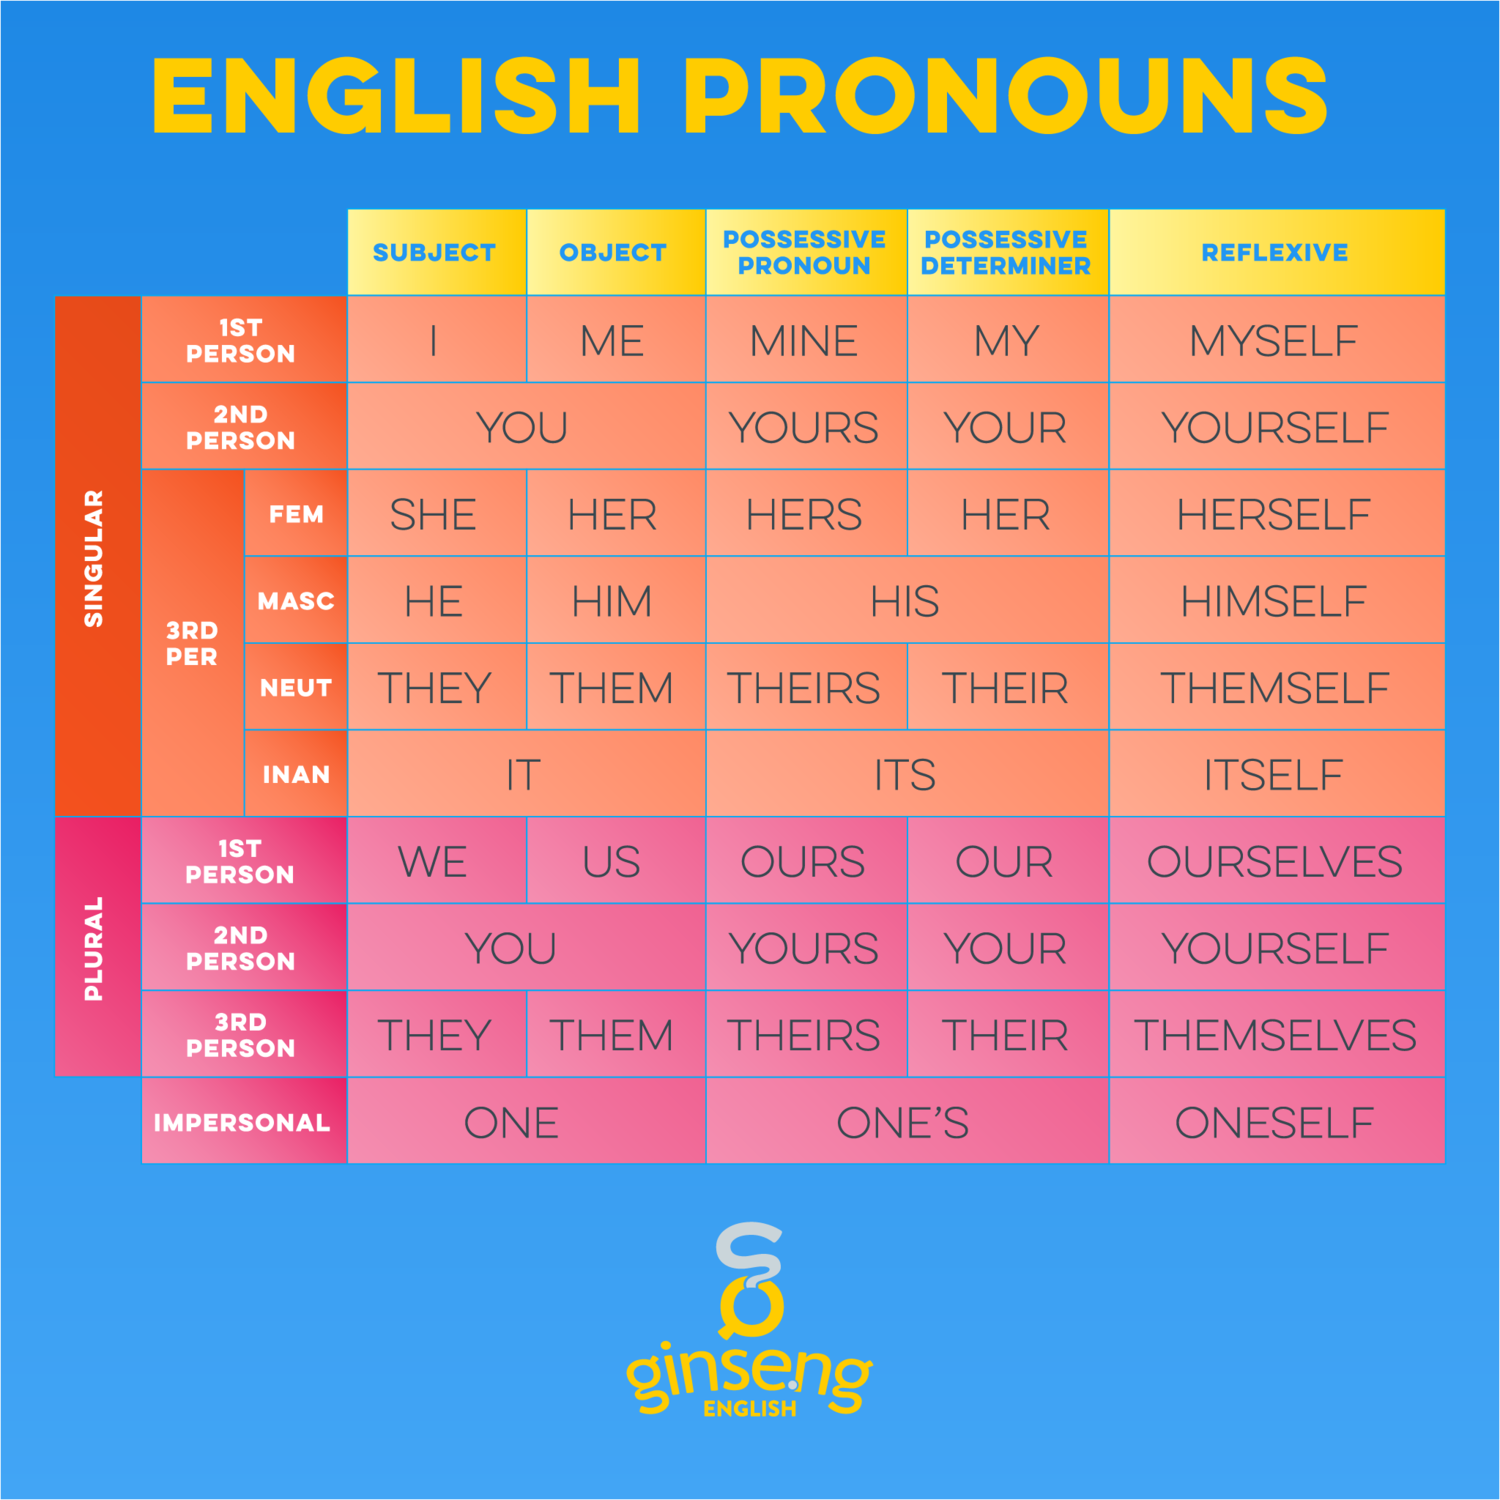 What Pronoun Is Ours